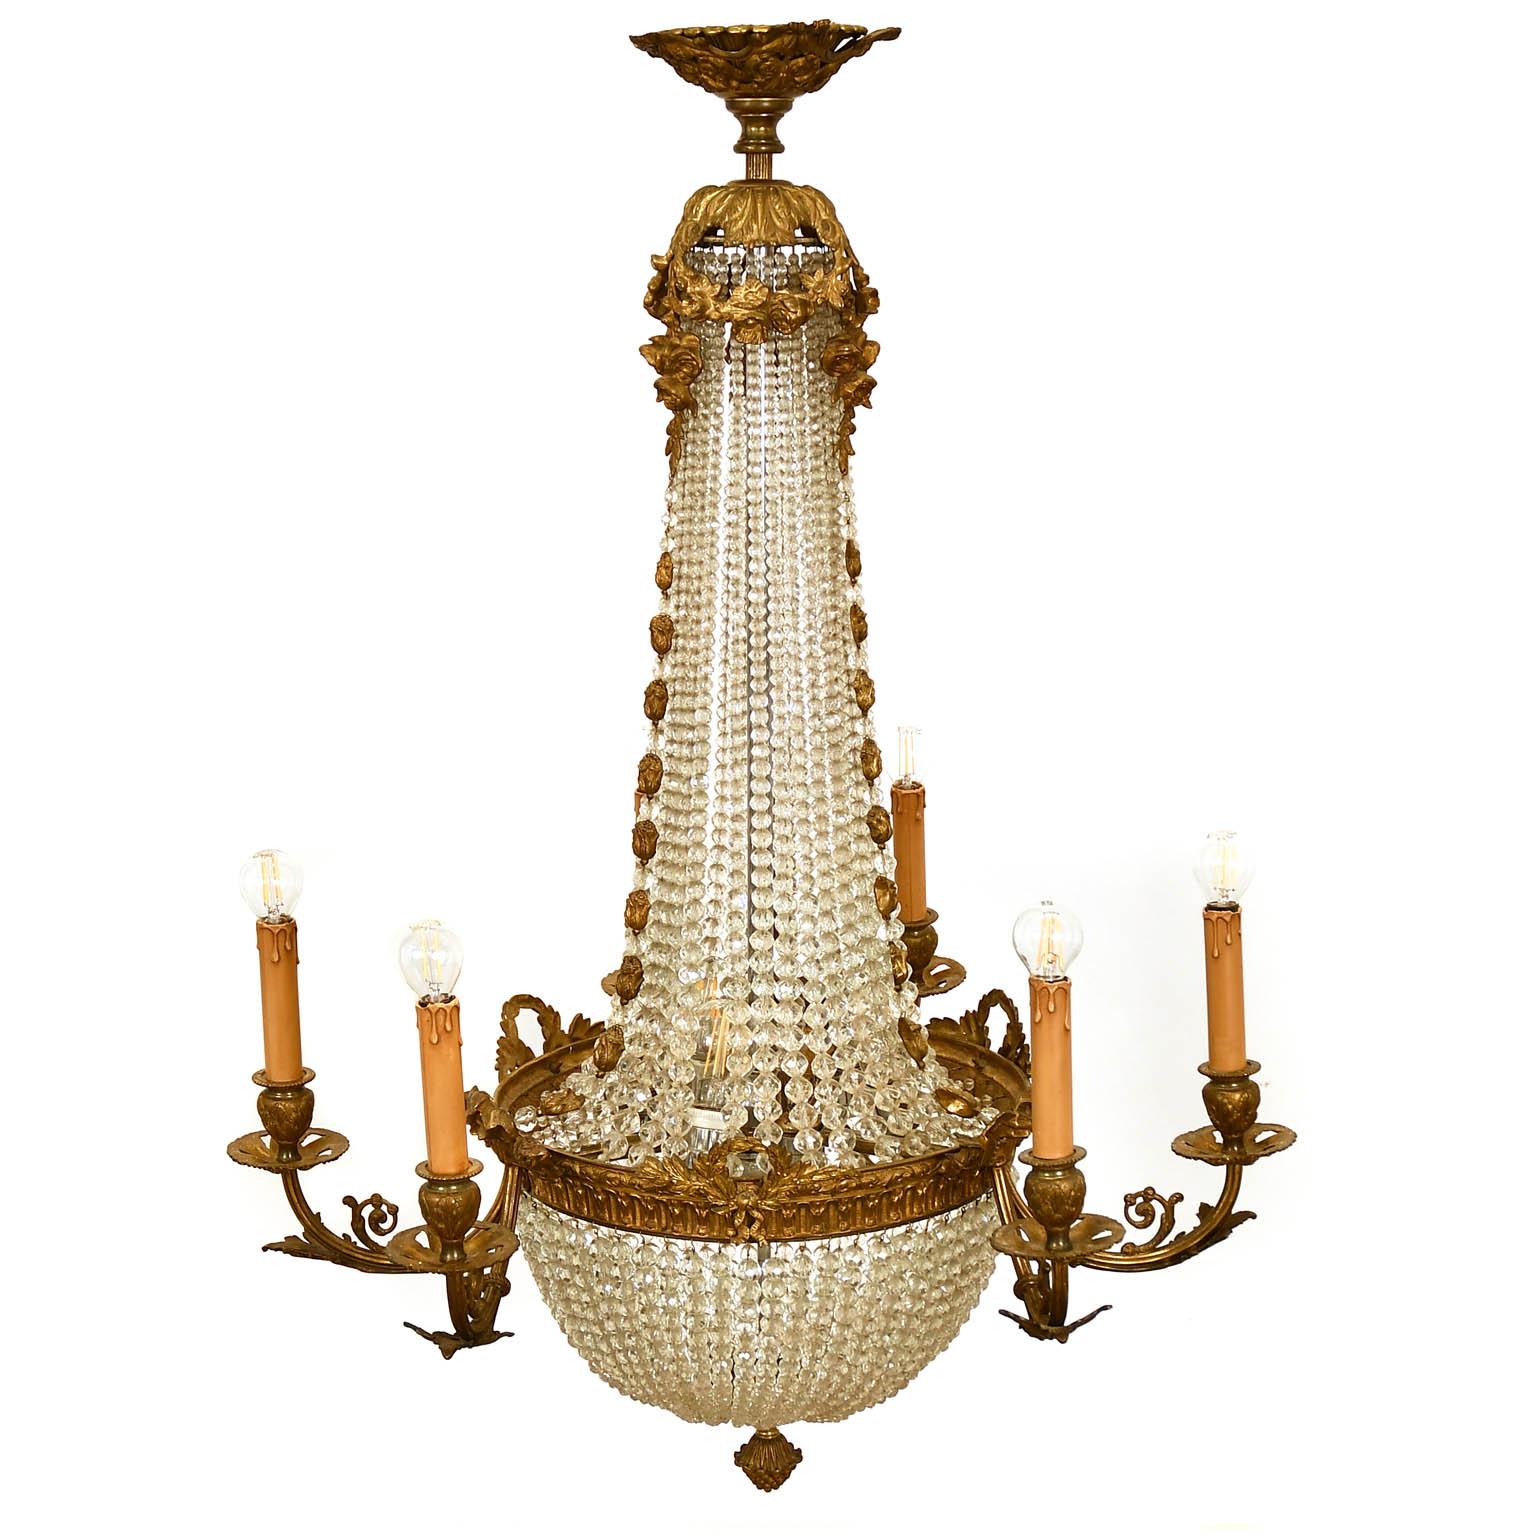 Antique Classicist Austrian bronze and crystal chandelier / ceiling candelabra , circa 1880-1920s. 6 arms around the glass basket with fine, engraved cast Bronze ornaments, ending in Baldachin crowning.
 We did not rewire the lamp, we just